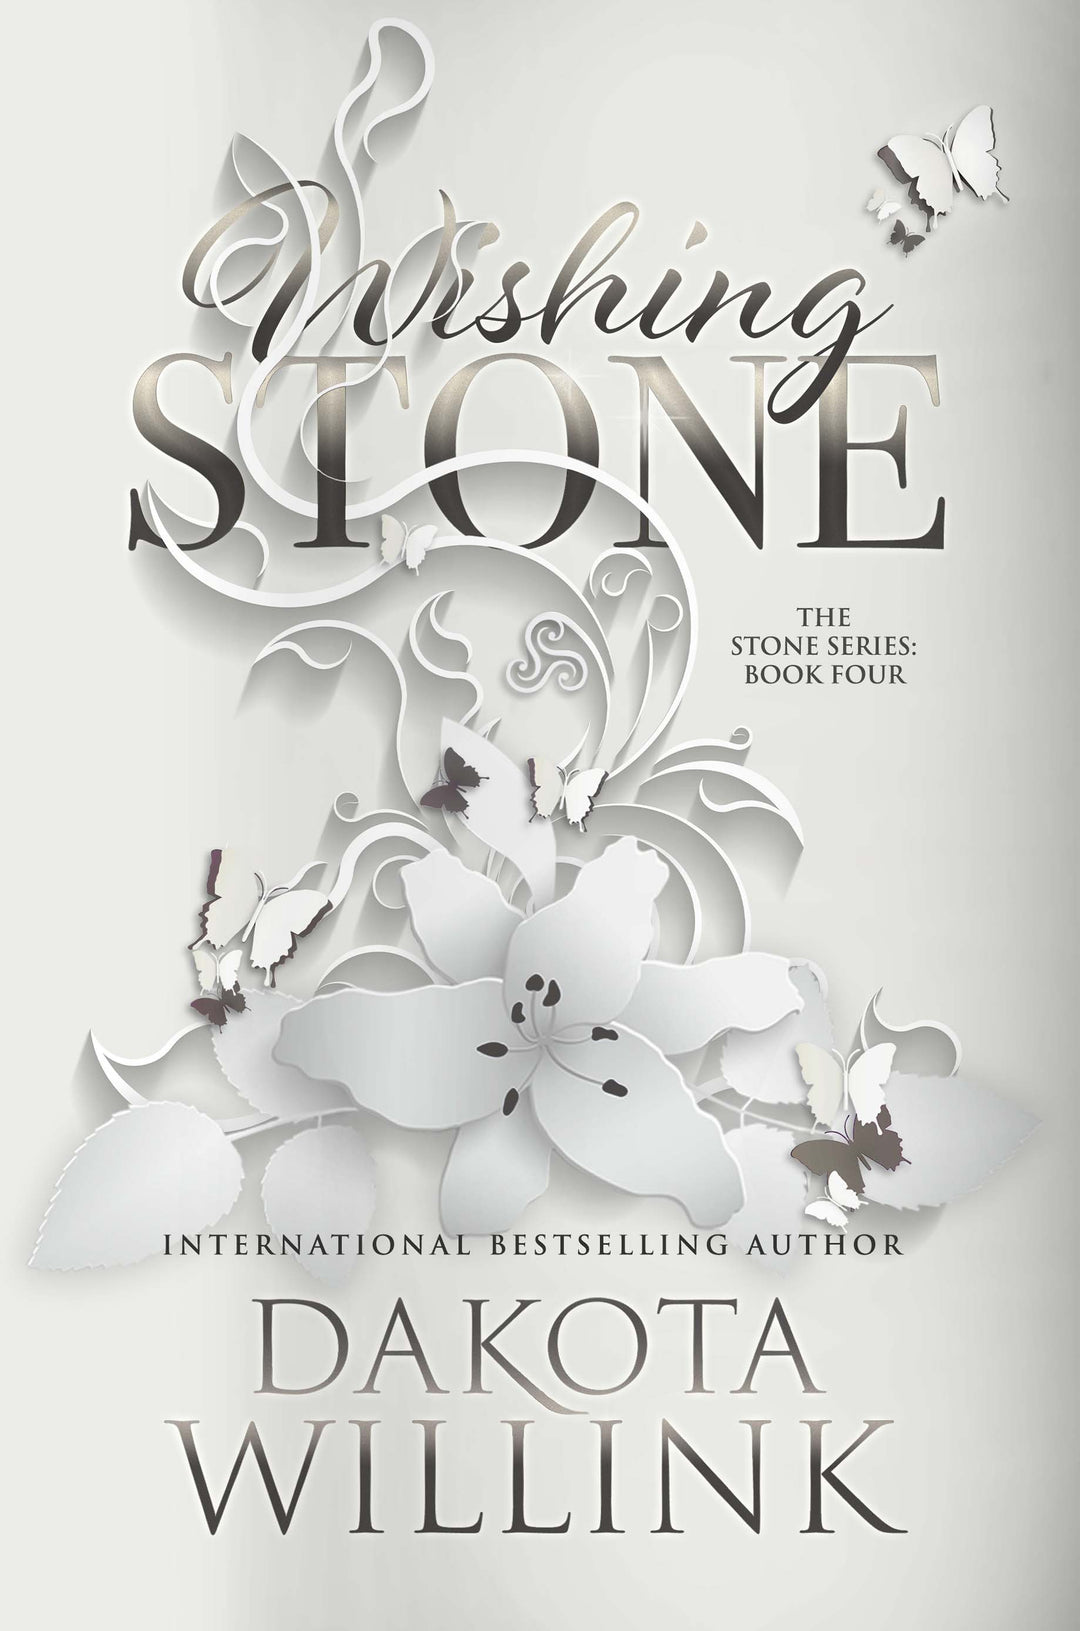 Wishing Stone (limited edition hardcover with dust jacket)